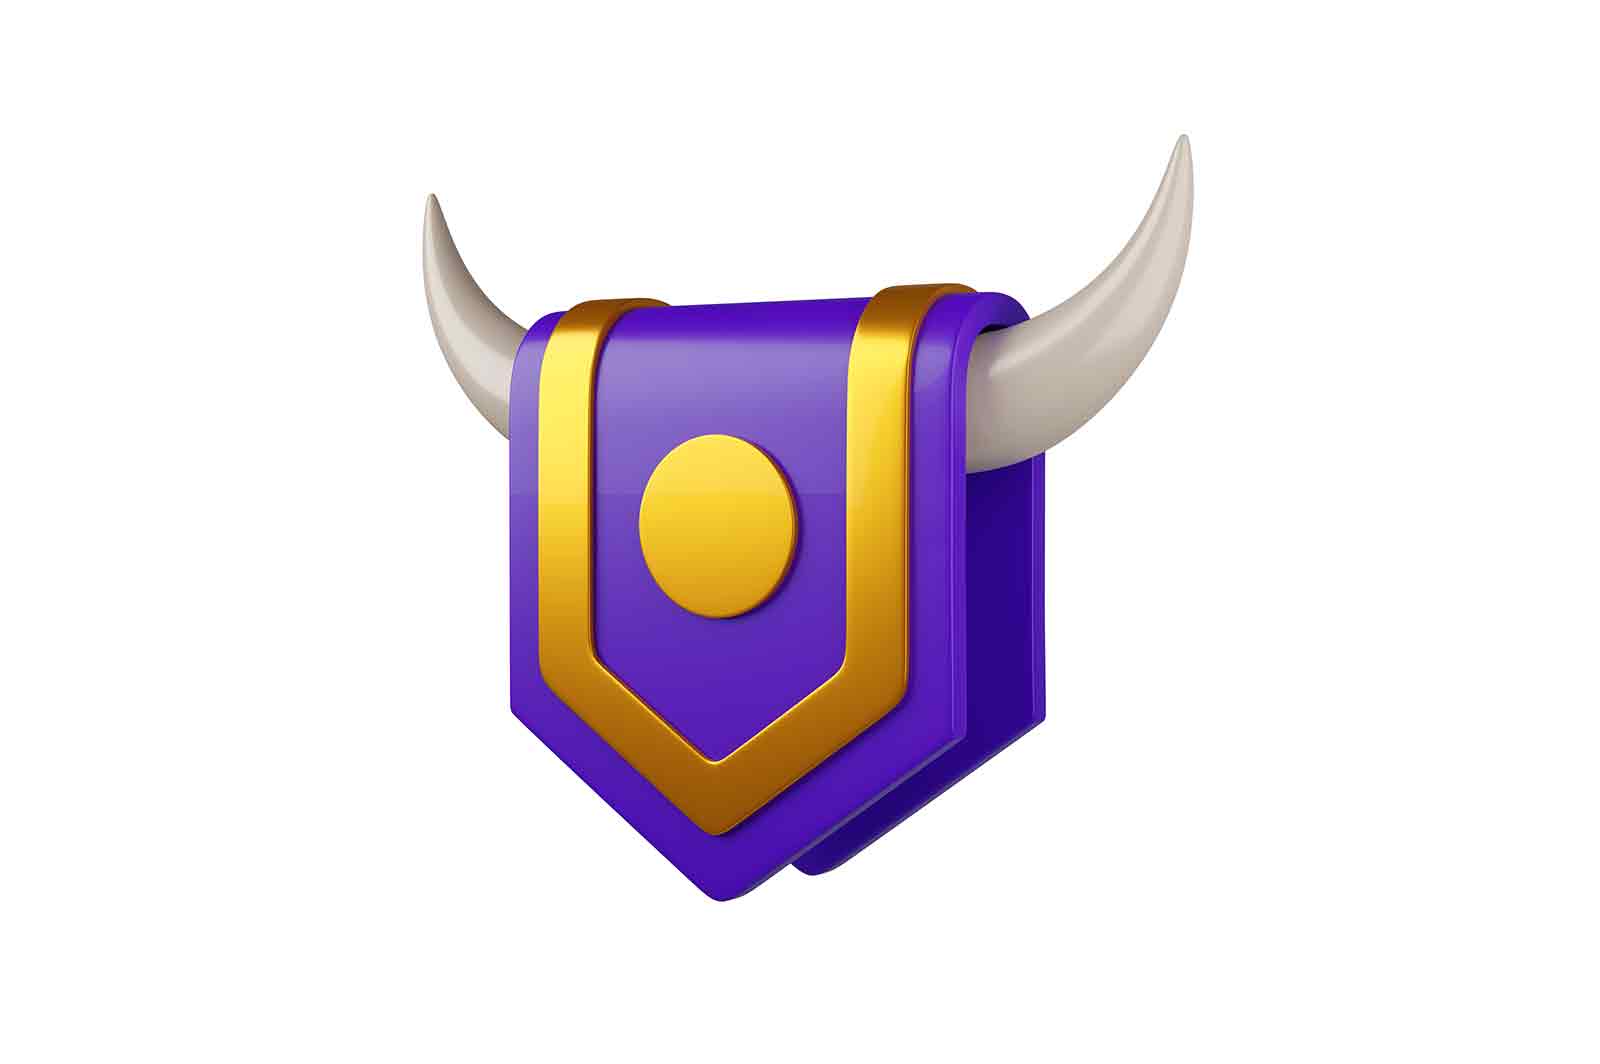 Shield with horns, 3d rendered illustration. Symbol of strength, protection, or aggression.